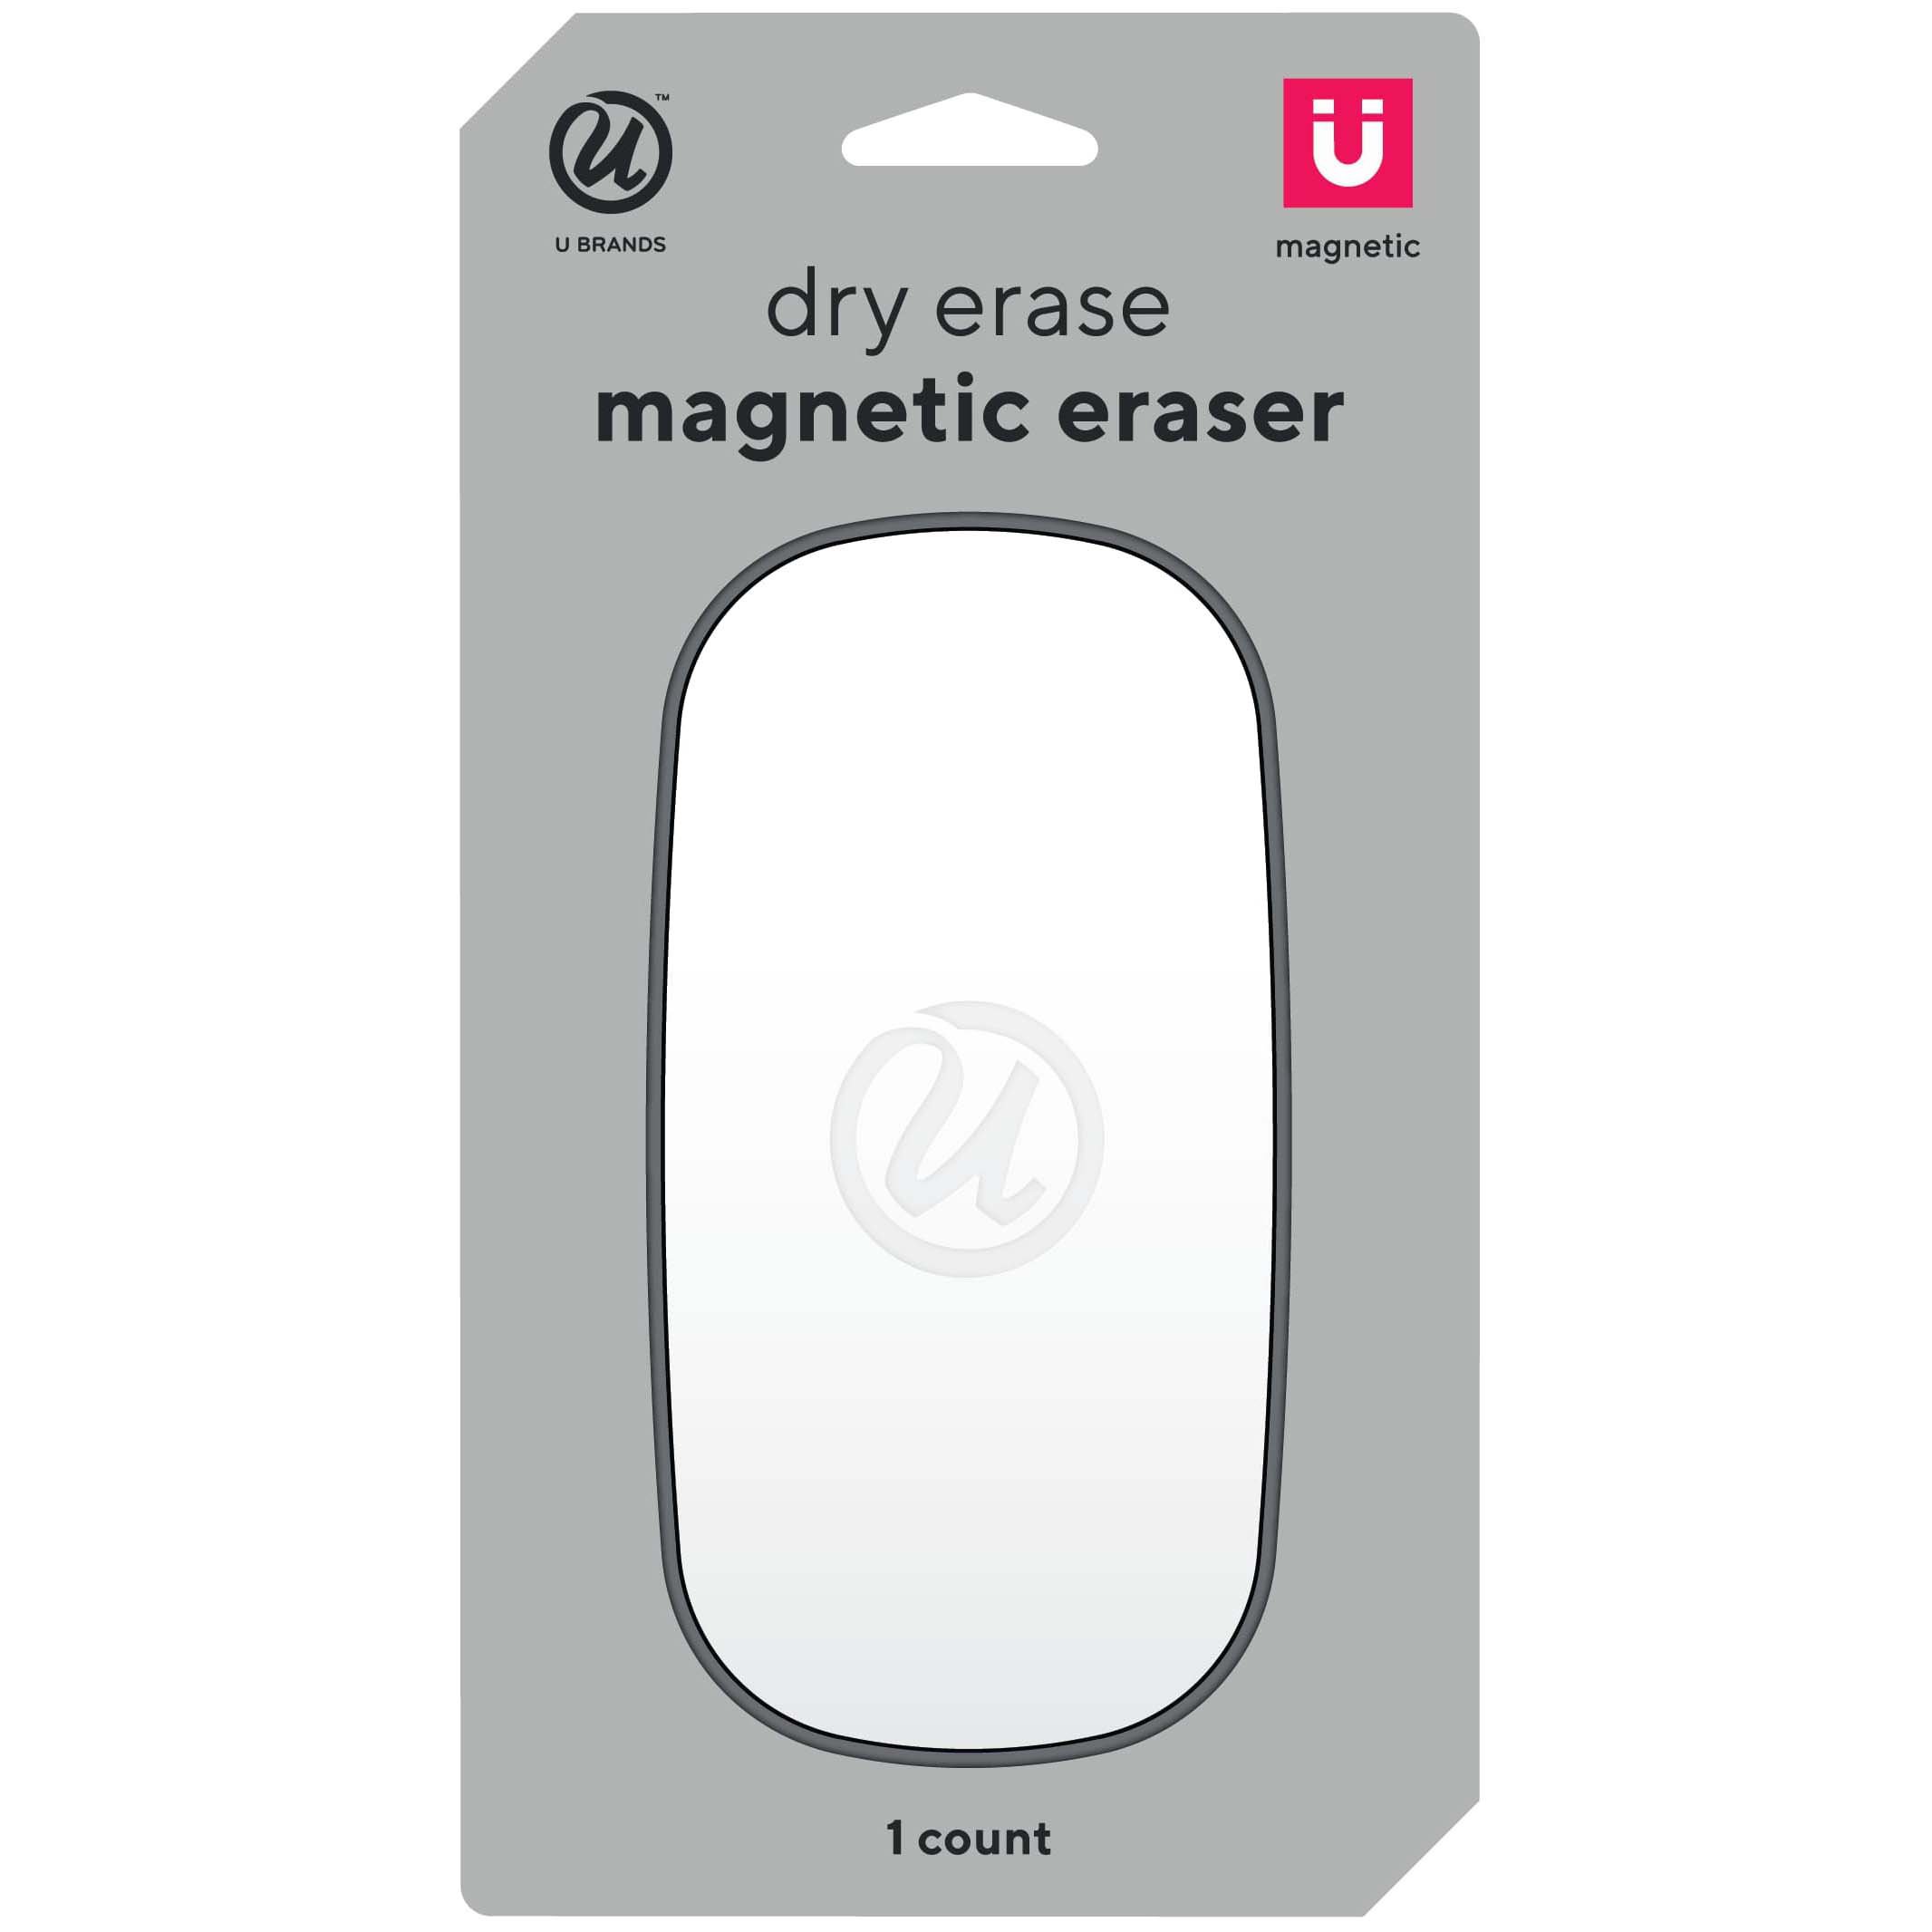 Yubbler - Magnetic Dry-Erase Markers With Erasers